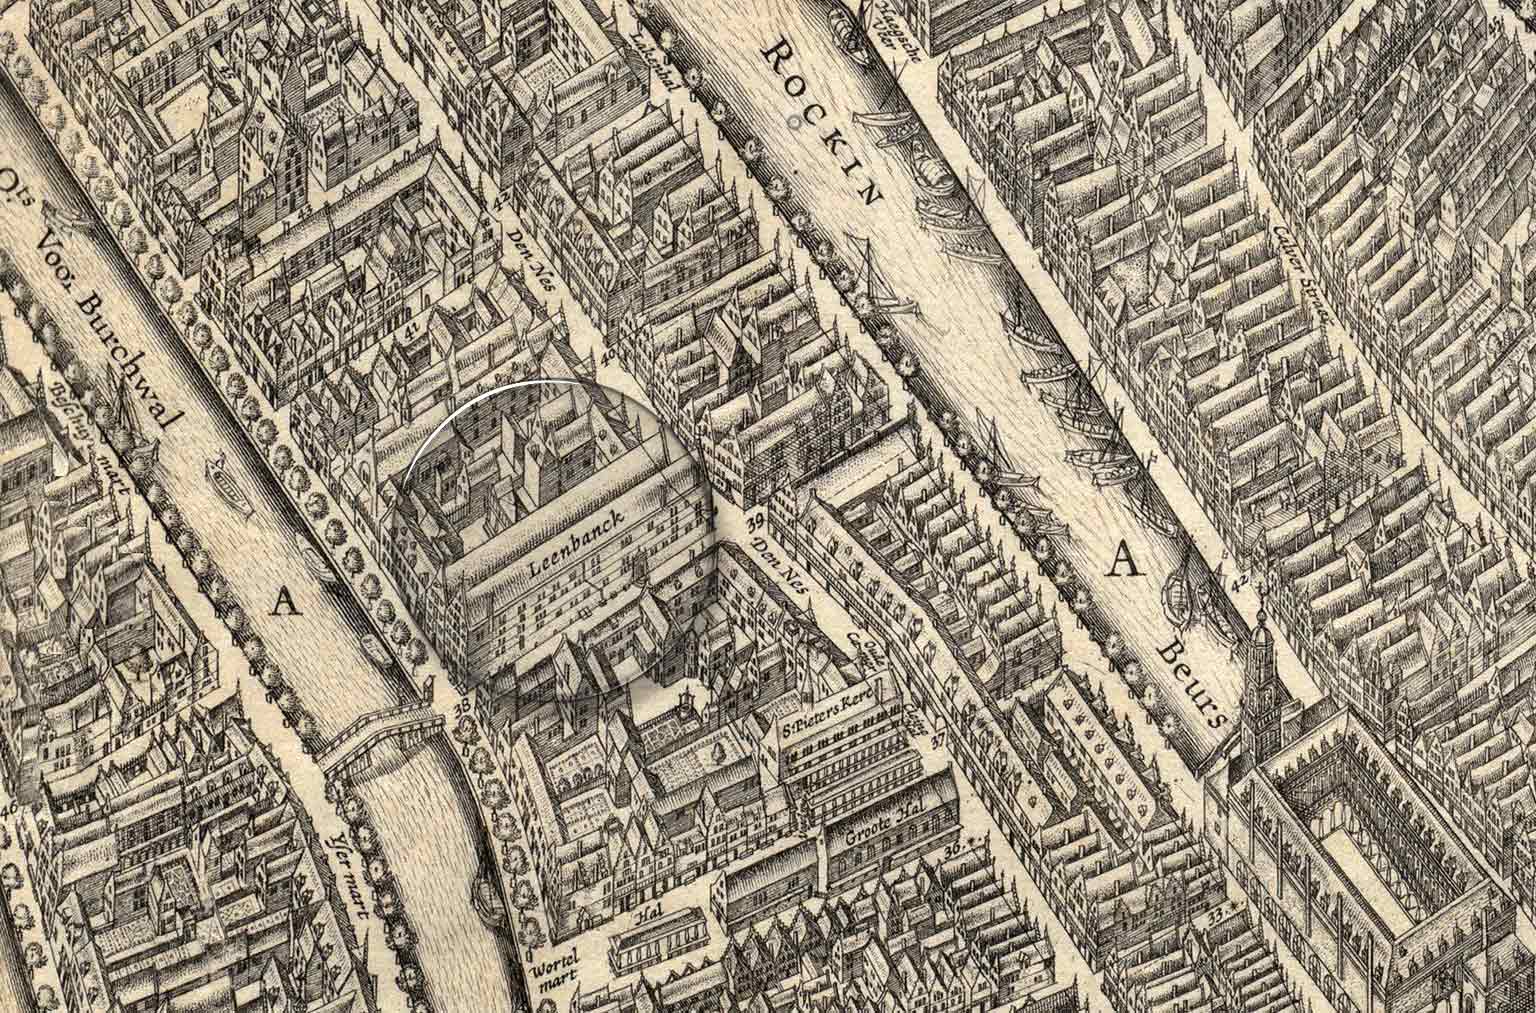 City Pawn Bank, Amsterdam, detail of a map from 1625